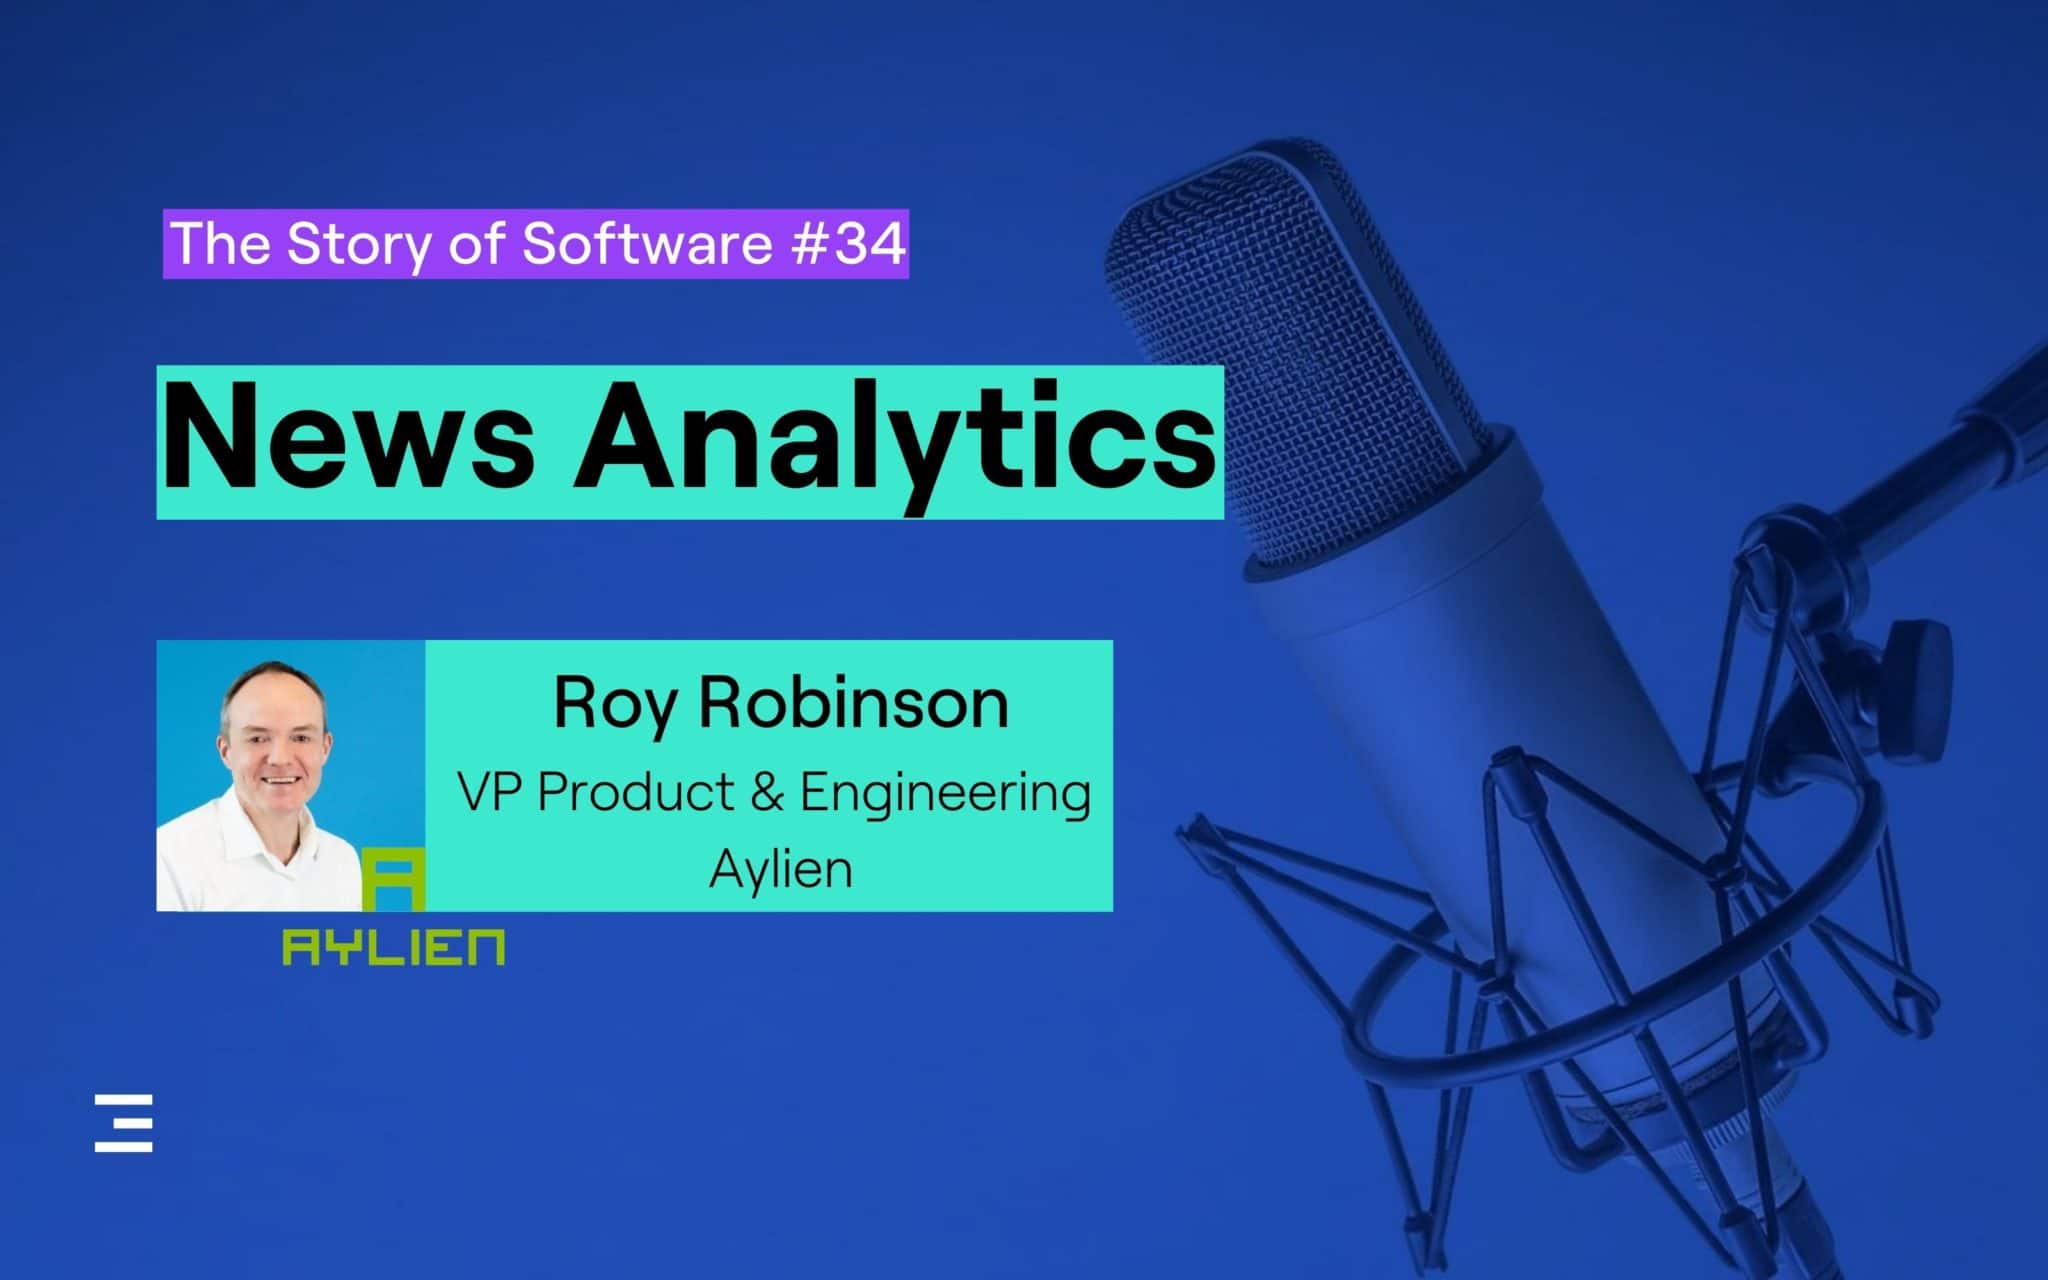 story of software podcast episode on news analytics